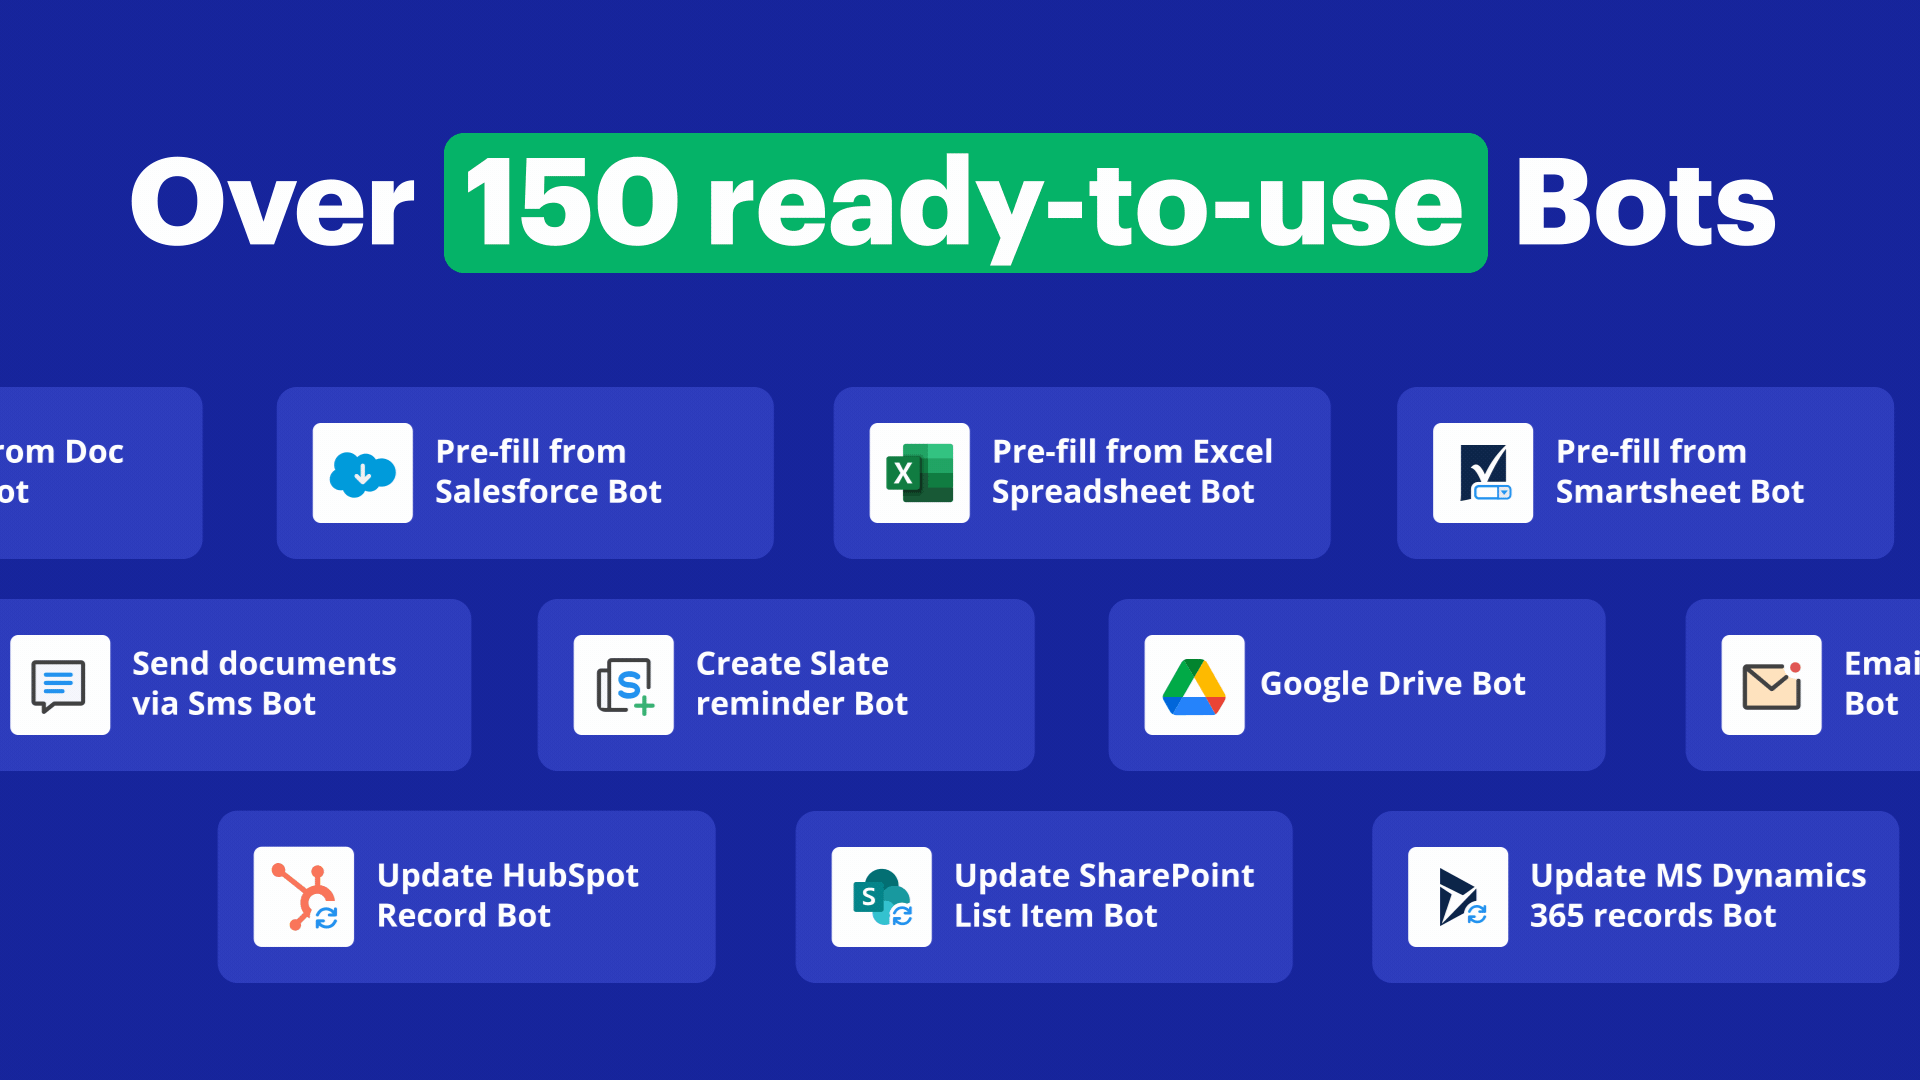 Check out 150 ready-to-use airSlate Bots